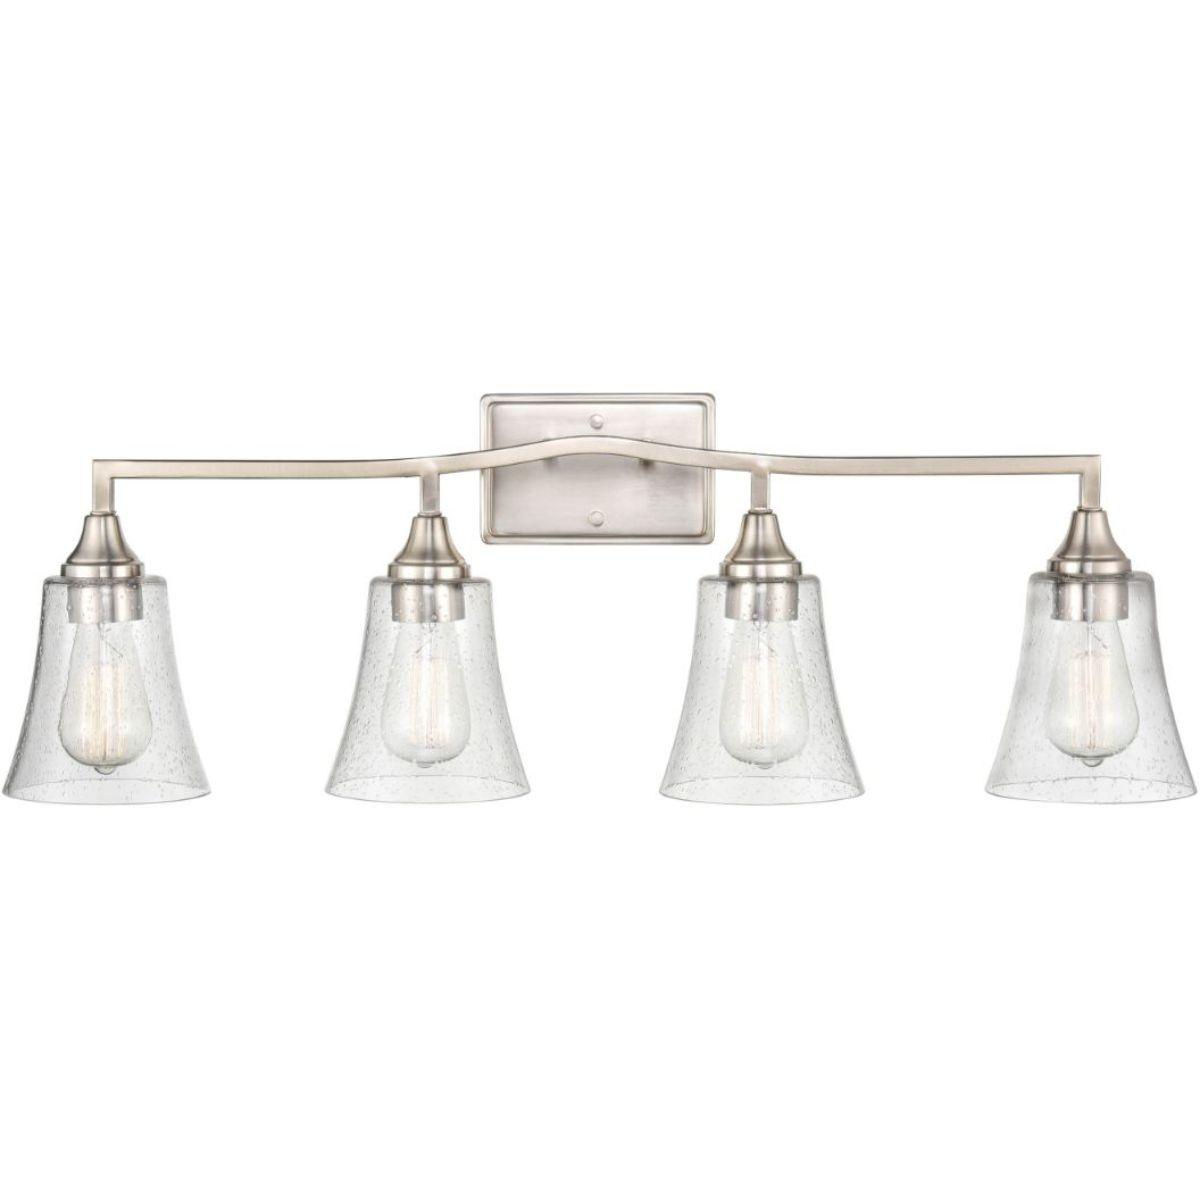 Caily 33 in 4 Lights Vanity Light